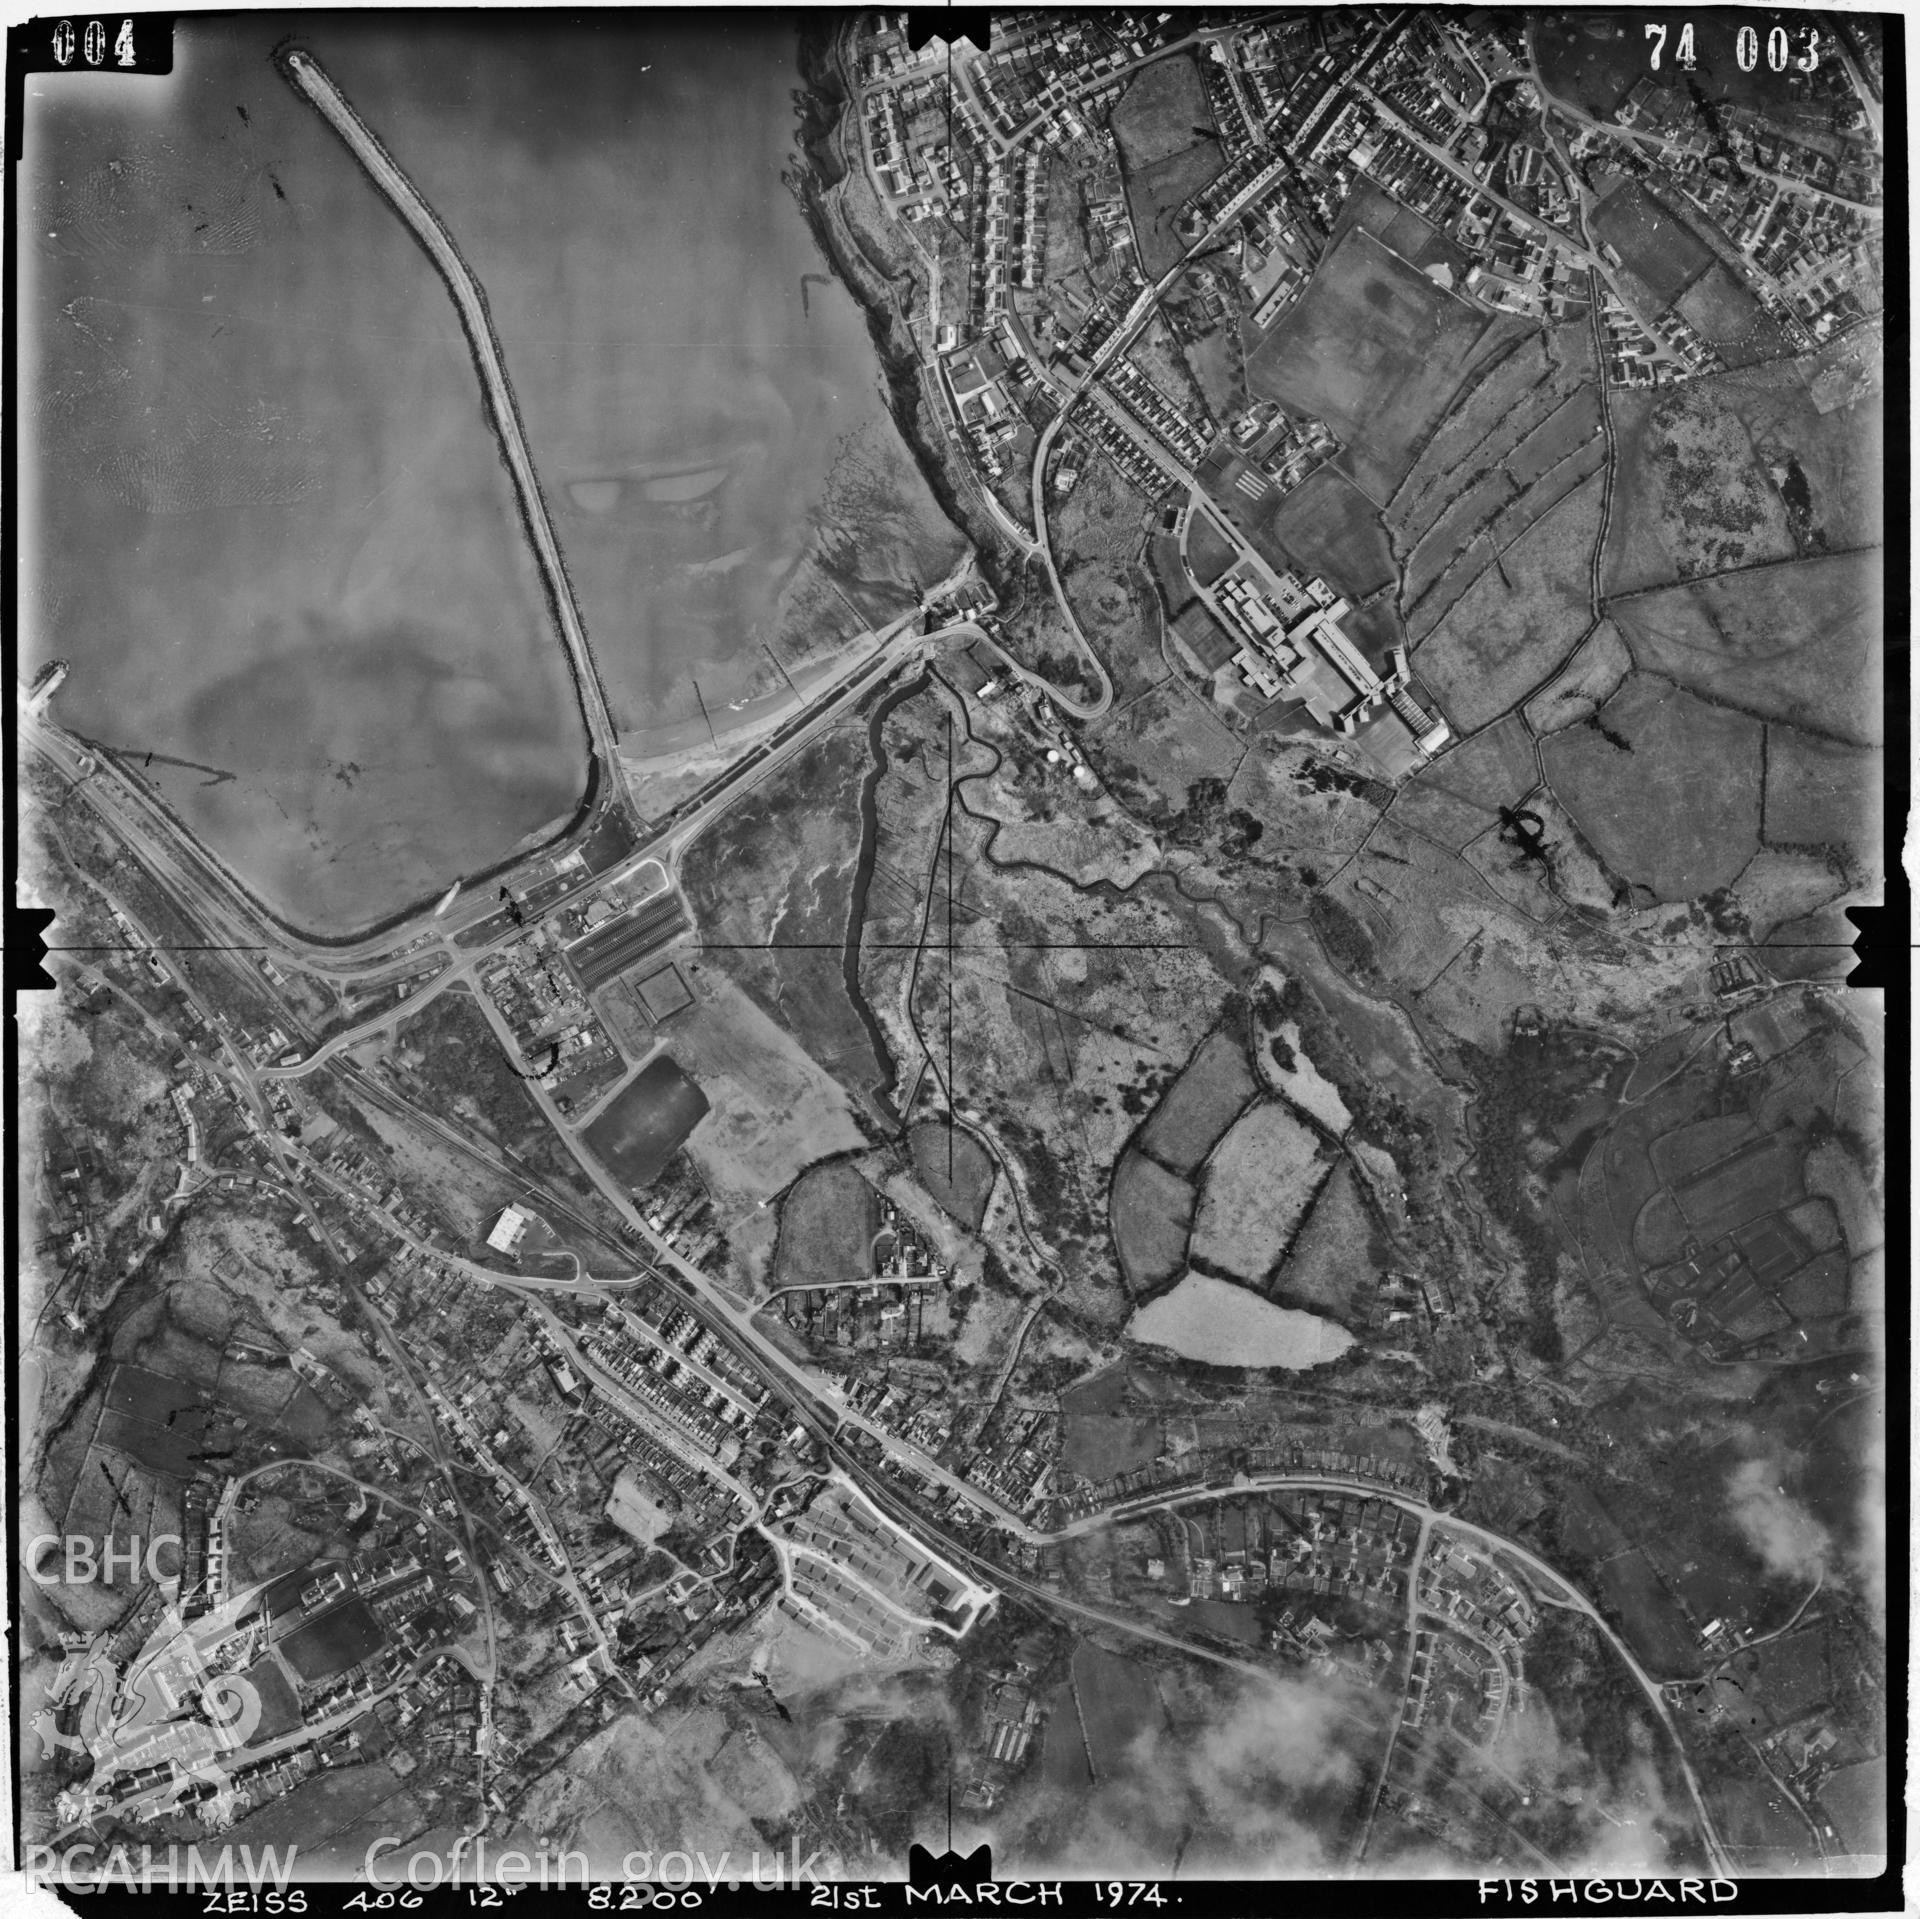 Digitized copy of an aerial photograph showing Fishguard, taken by Ordnance Survey, 1974.